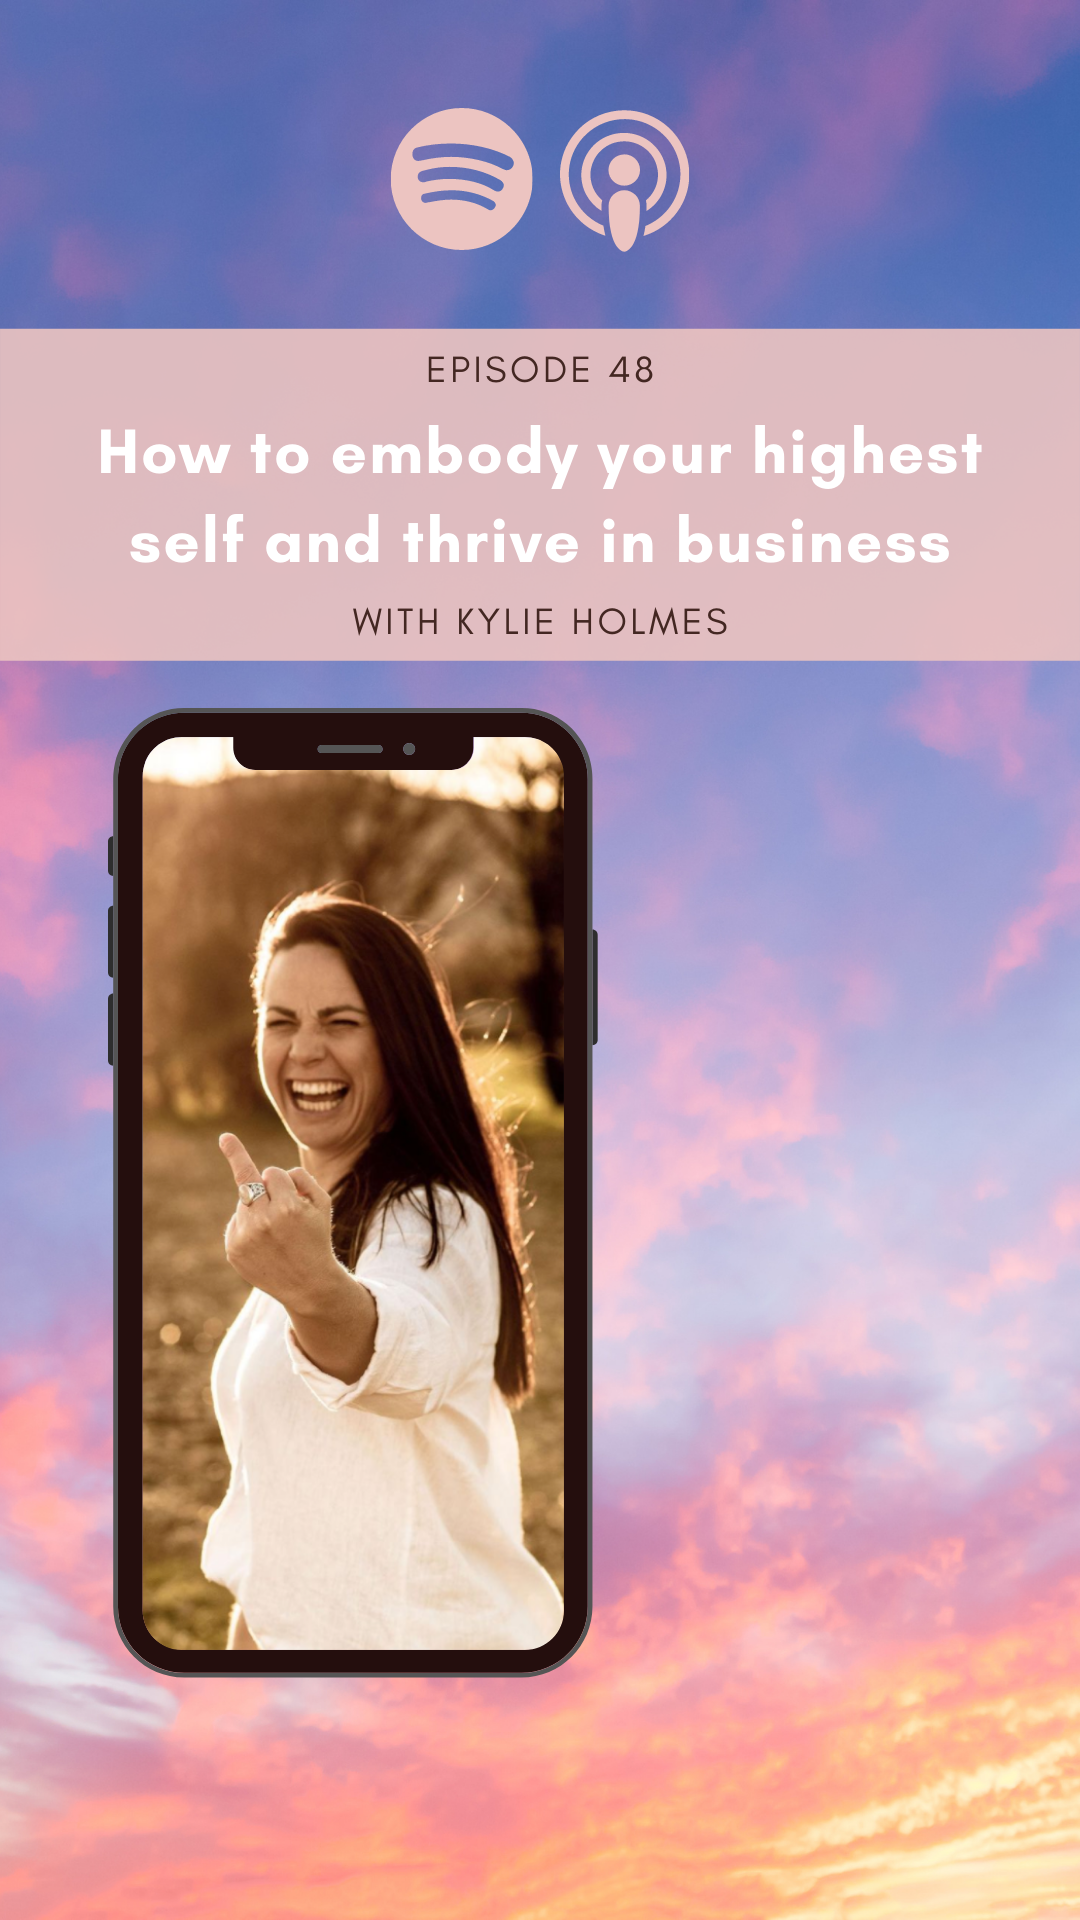 embody your highest self with kylie holmes